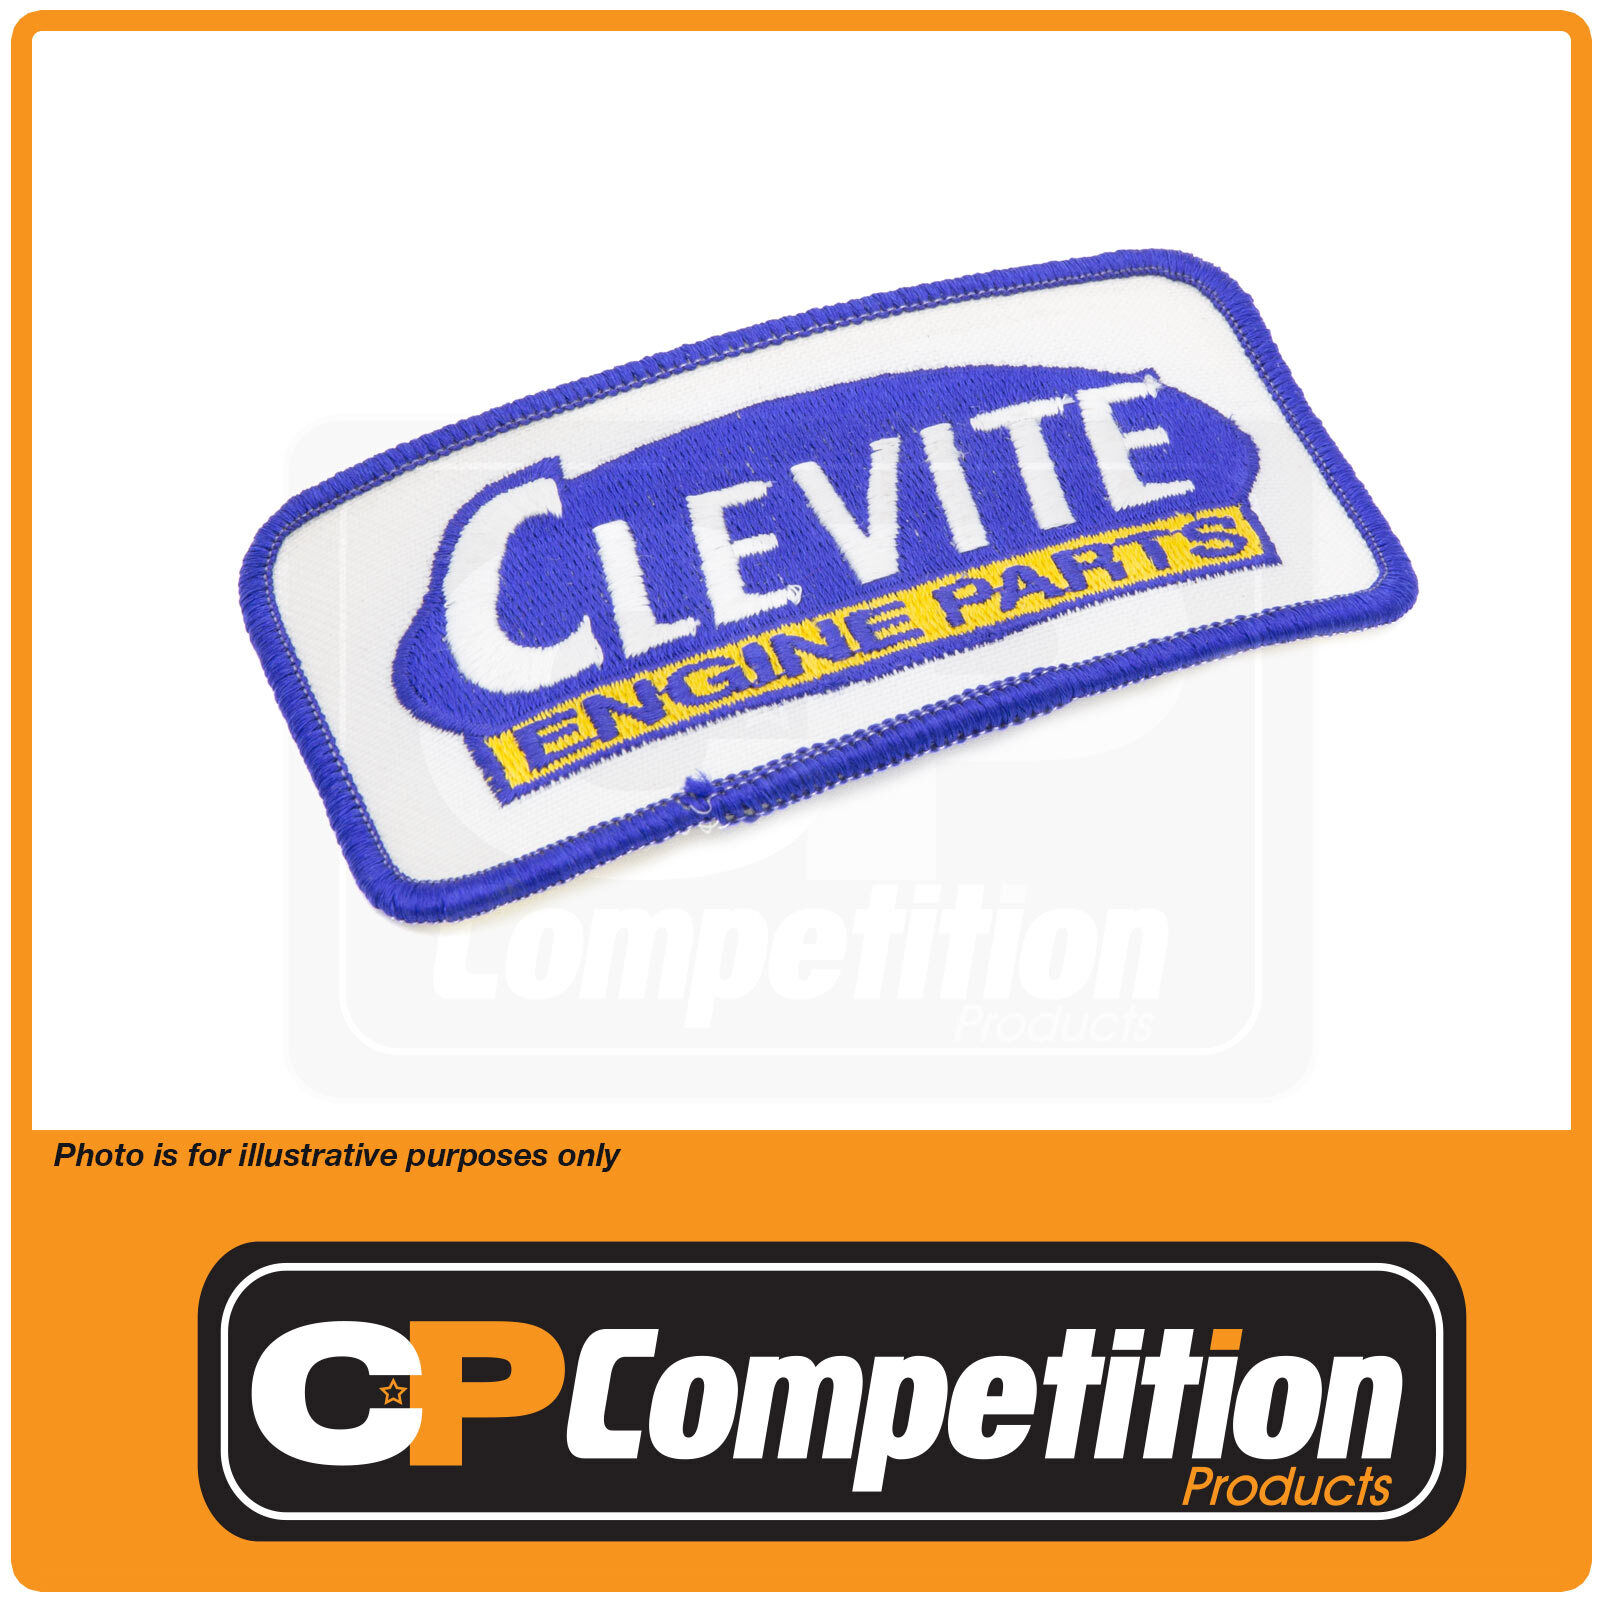 CLEVITE ENGINE PARTS SEW ON CLOTHING PATCH 10cm x 5cm